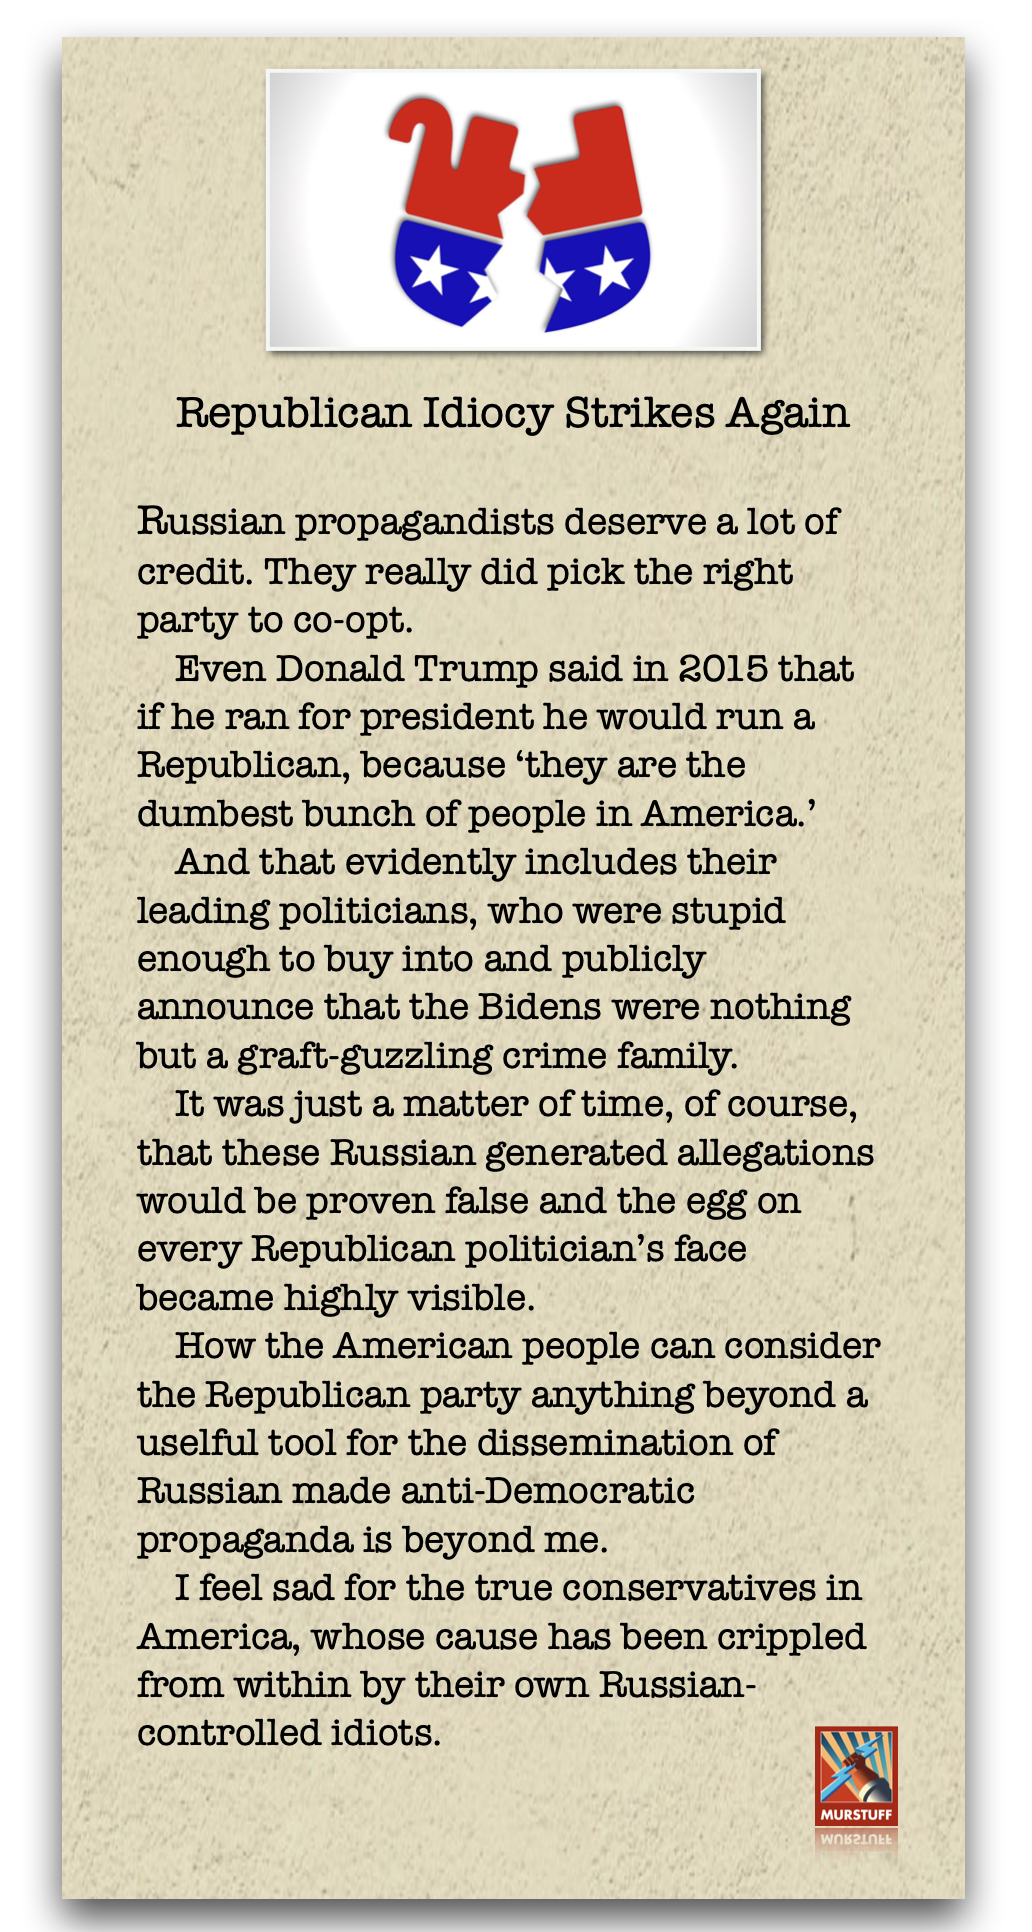 Republican Idiocy Strikes Again

Russian propagandists deserve a, lot of
credit. They really did pick the right
party to co-opt.

Even Donald Trump said in 2015 that
if he ran for president he would run a
Republican, because ‘they are the
dumbest bunch of people in America.’

And that evidently includes their
leading politicians, who were stupid
enough to buy into and publicly
announce that the Bidens were nothing
but a graft-guzzling crime family.

It was just a matter of time, of course,
that these Russian generated allegations
would be proven false and the egg on
every Republican politician’s face
became highly visible.

How the American people can consider
the Republican party anything beyond a
uselful tool for the dissemination of
Russian made anti-Democratic
propaganda is beyond me.

I feel sad for the true conservatives in
America, whose cause has been crippled
from within by their own Russian-
controlled idiots. x

la
ana